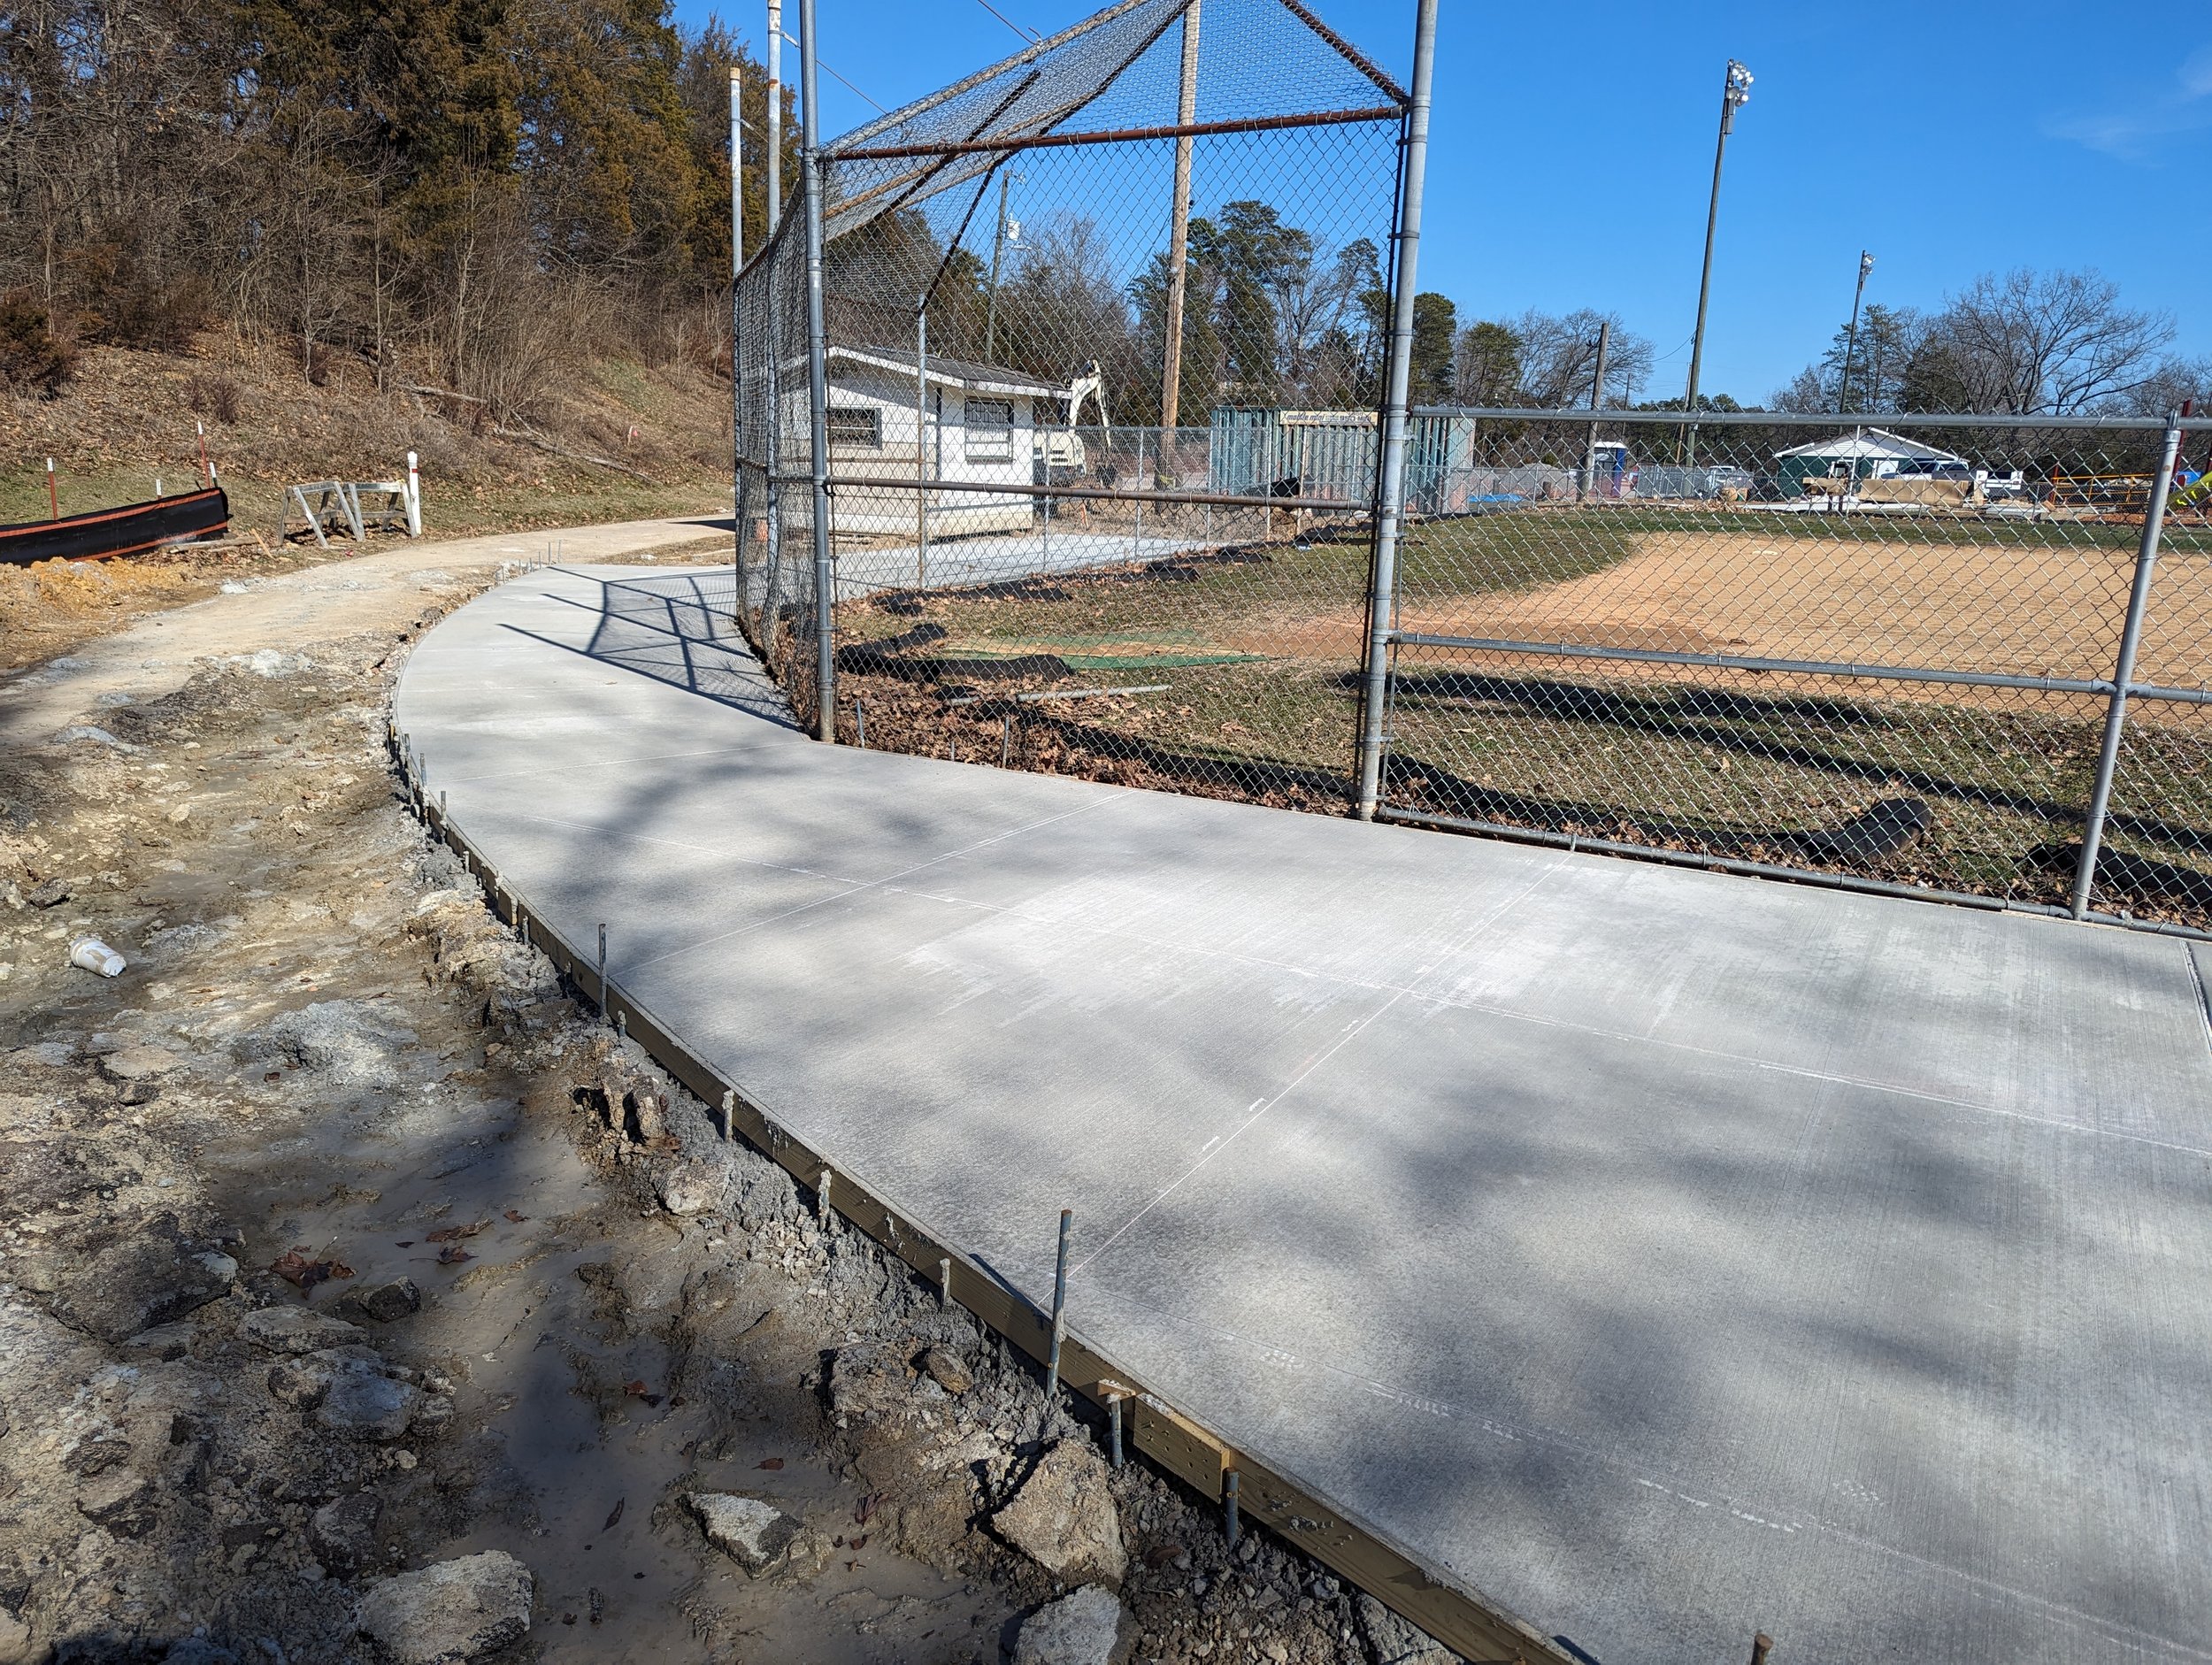 2/15/2024 - Concrete has been poured for the viewing area at Field 1.